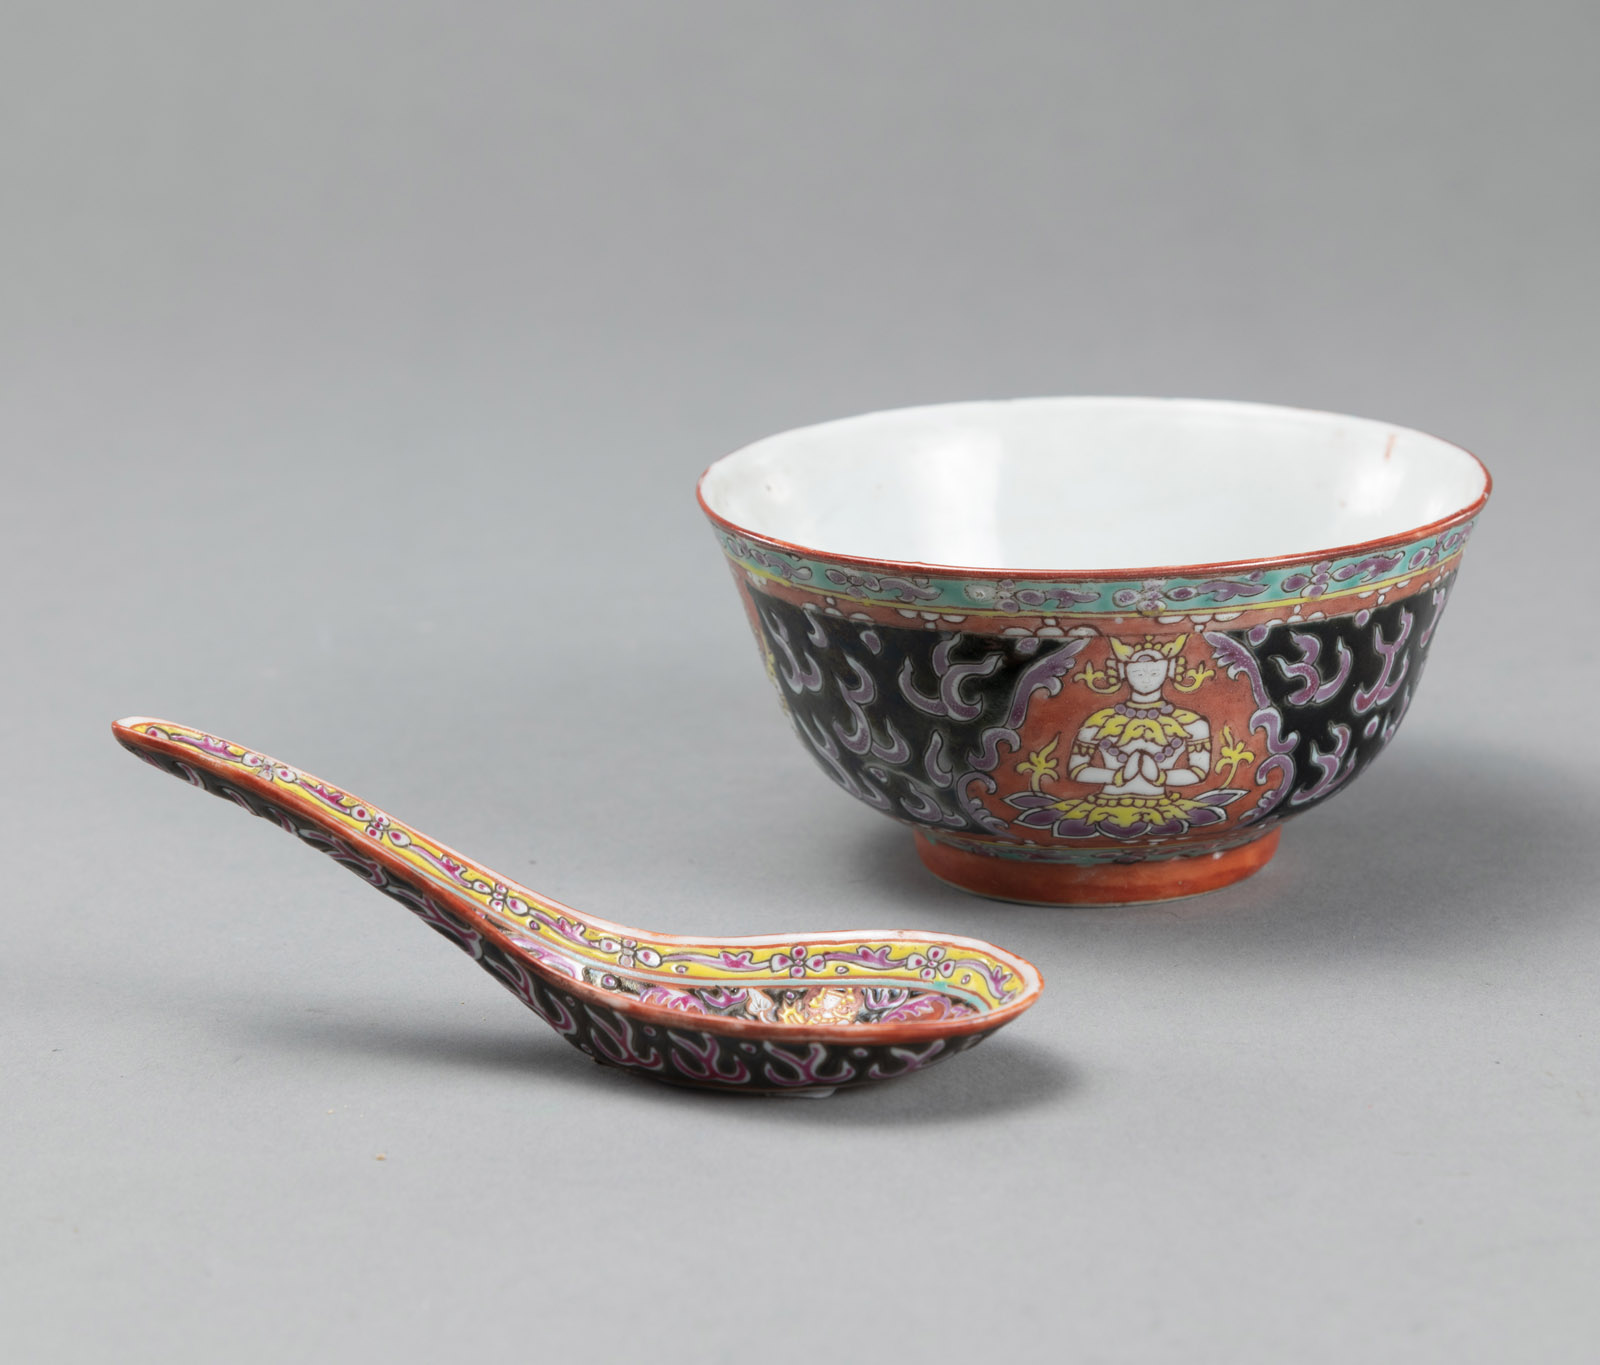 <b>A BENCHARONG BOWL AND A SPOON DEPICTING THEPANOM AND NORASINGH ON A BLACK GROUND WITH KRANOK FLAMES</b>